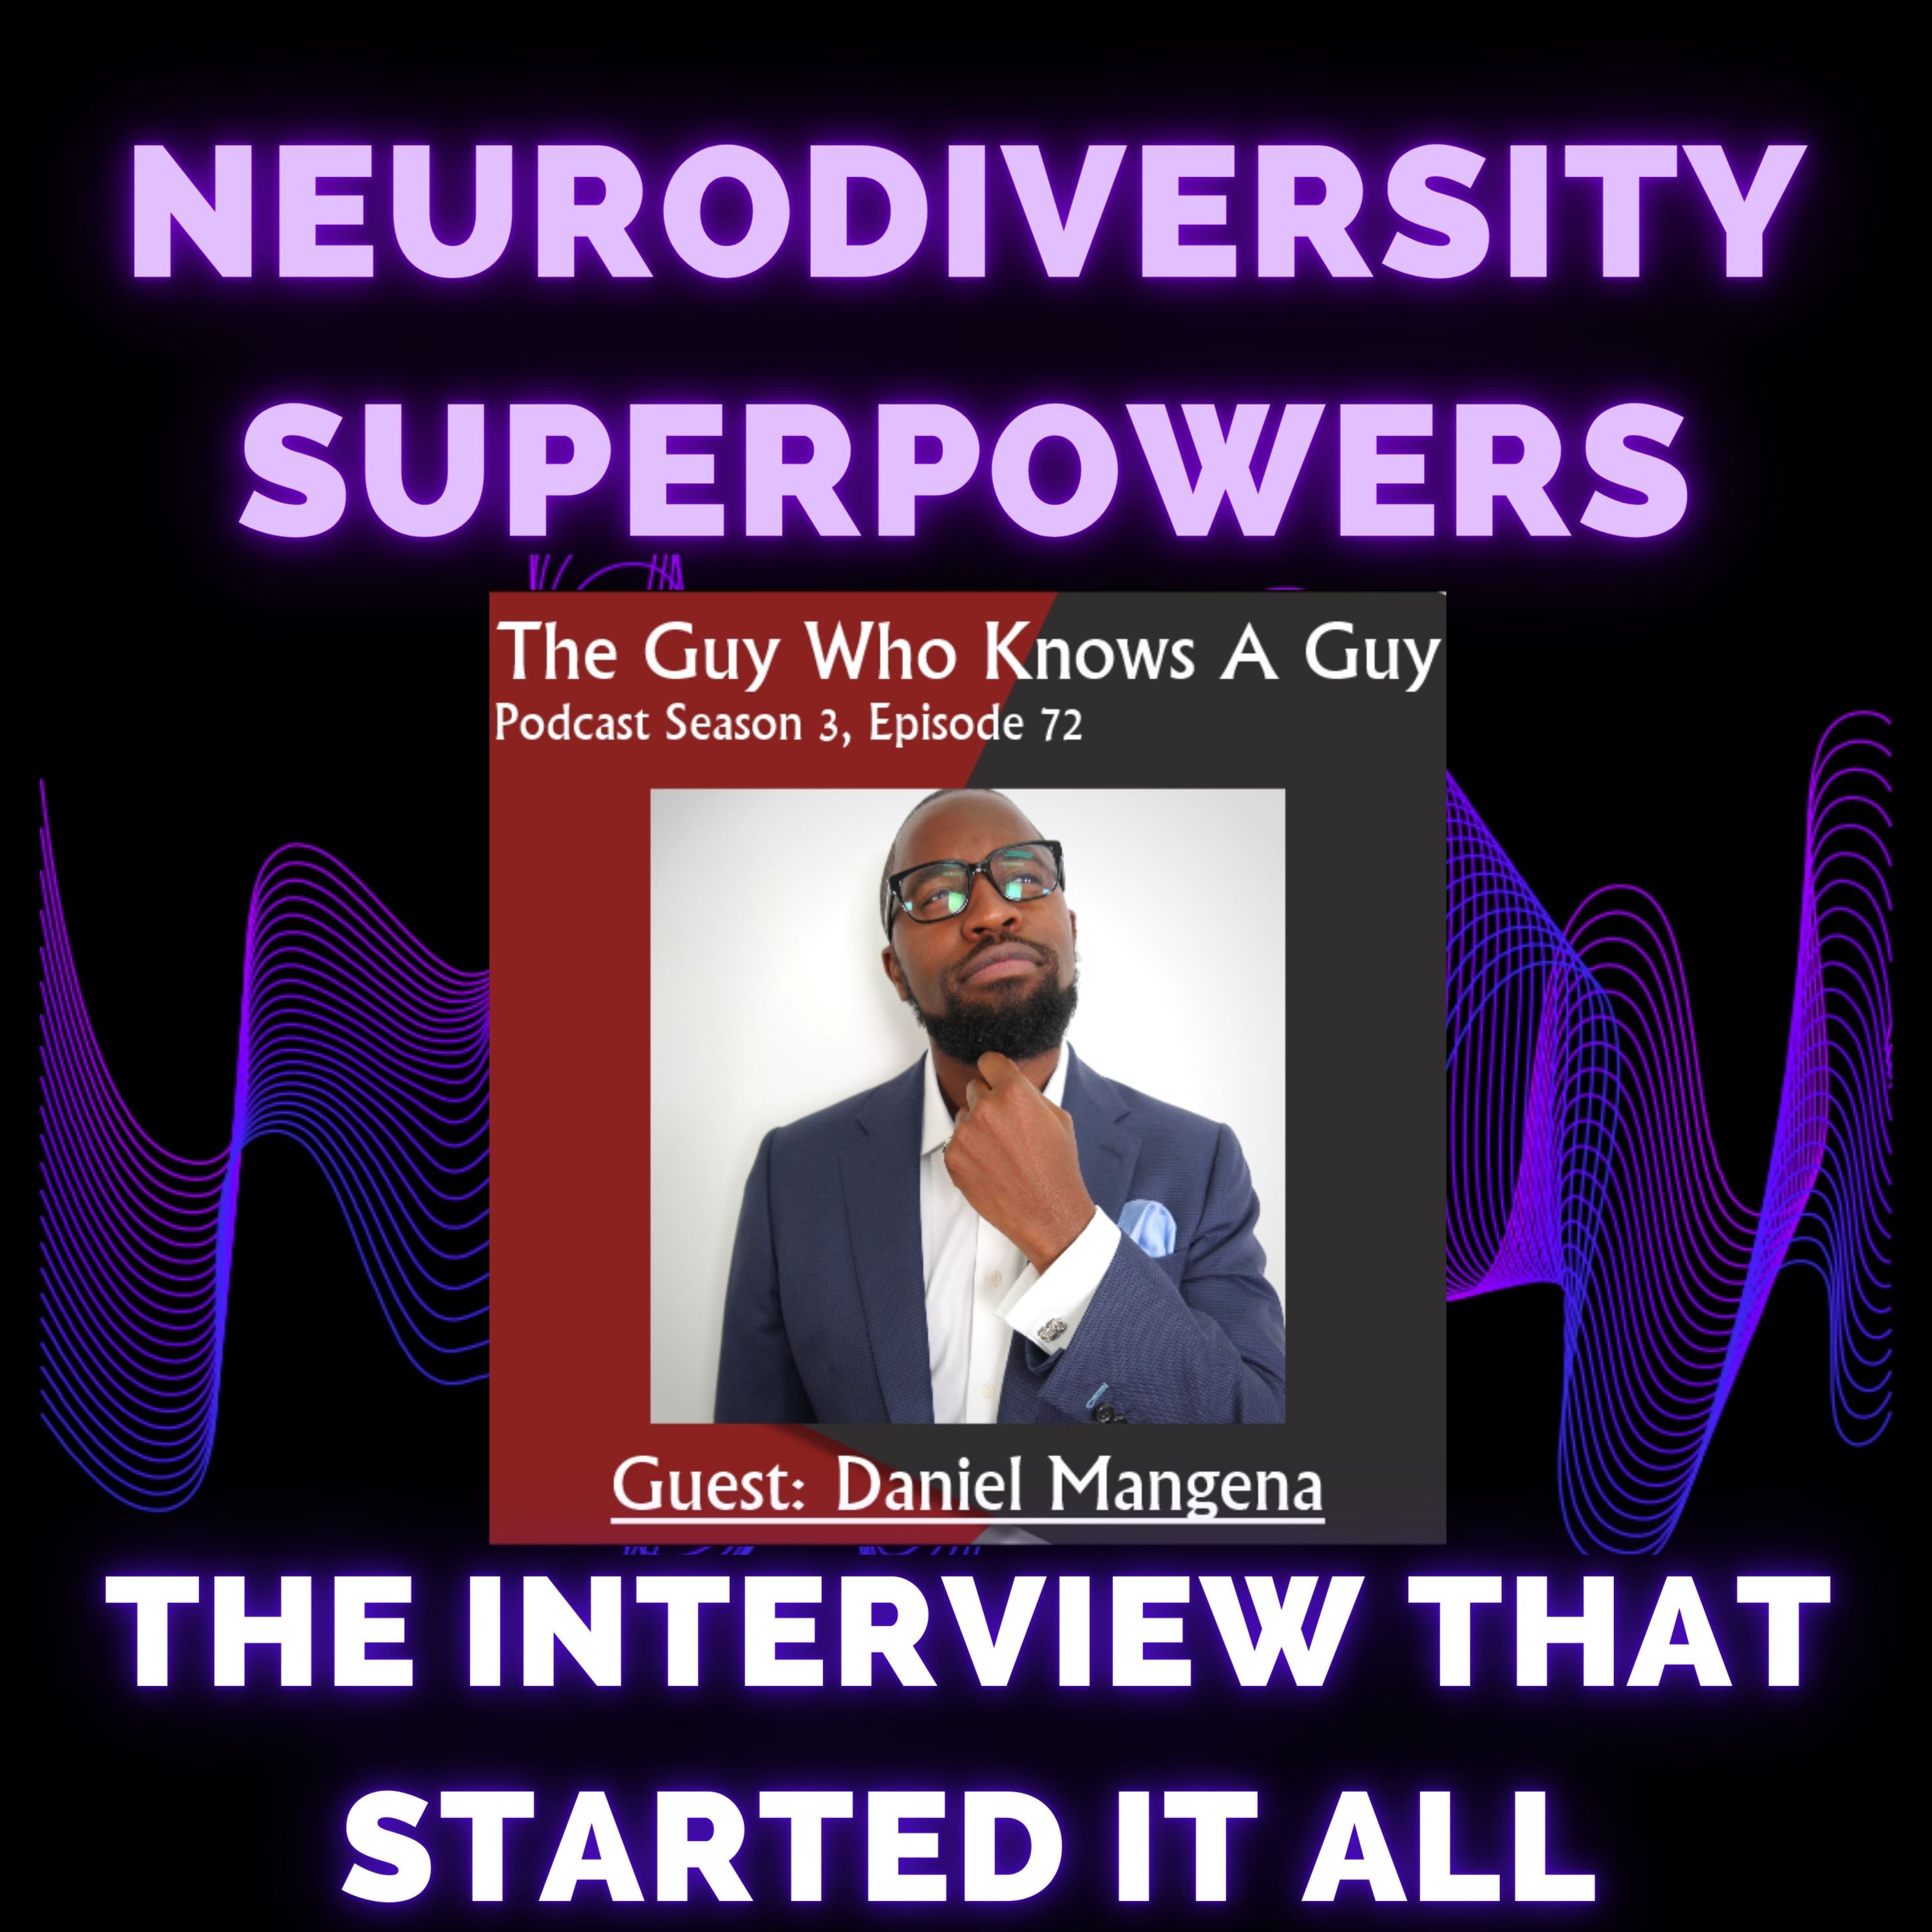 The Interview that started it all with Dan Mangena